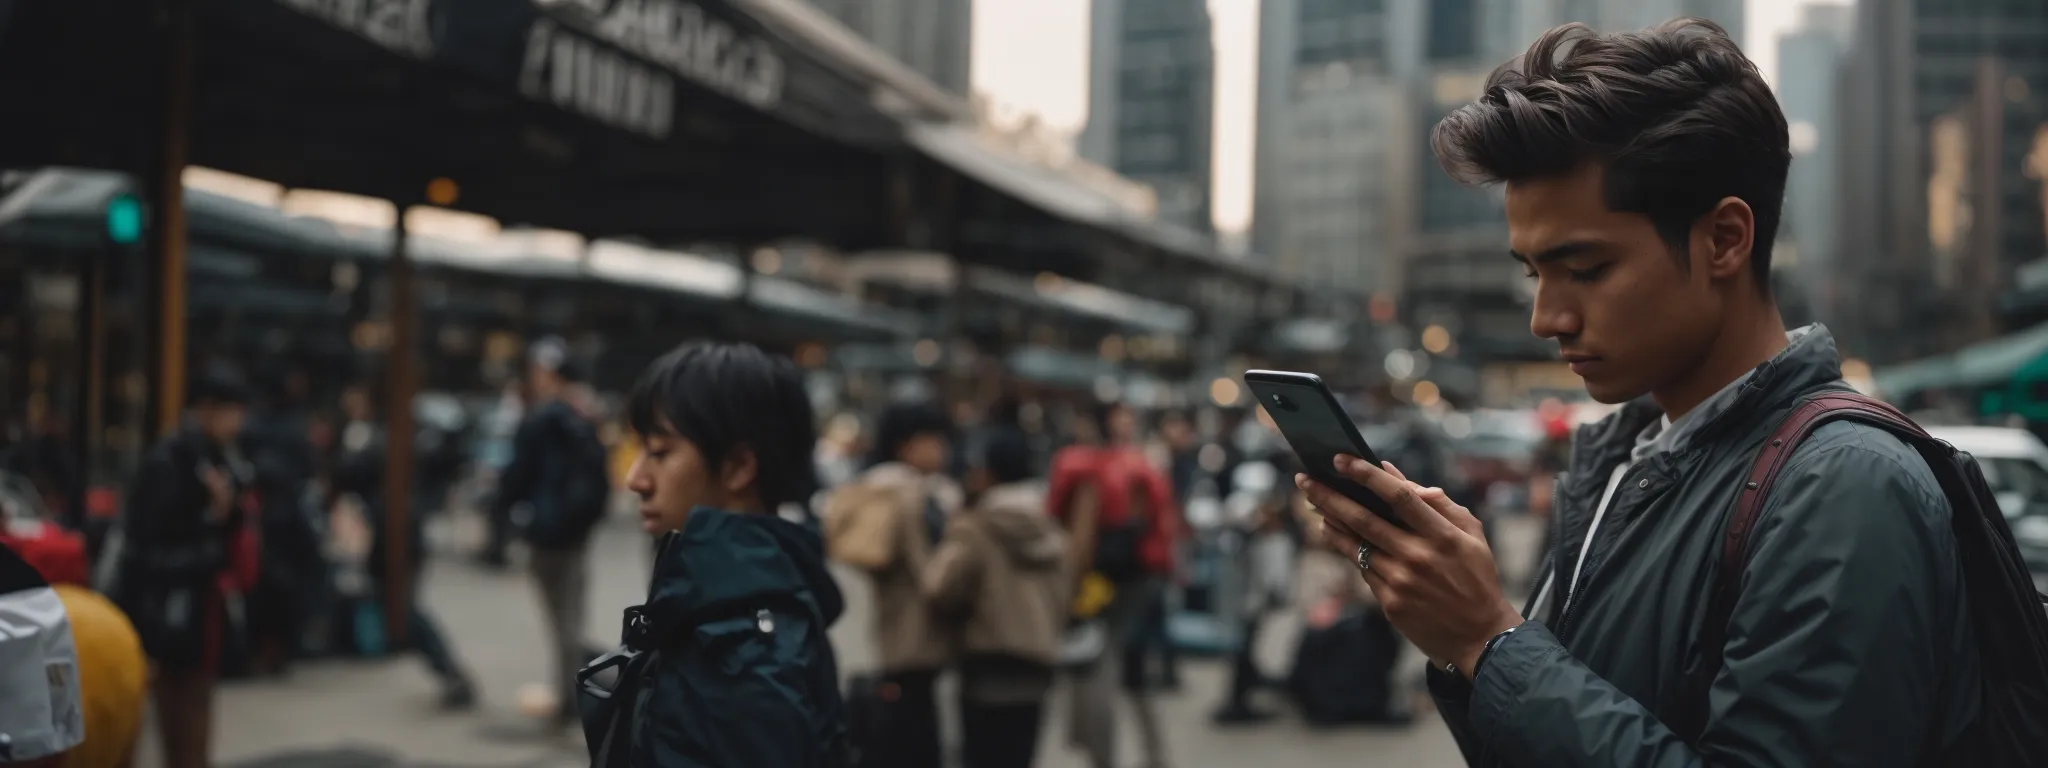 a focused individual intently browsing a website on a smartphone amidst a bustling urban setting.